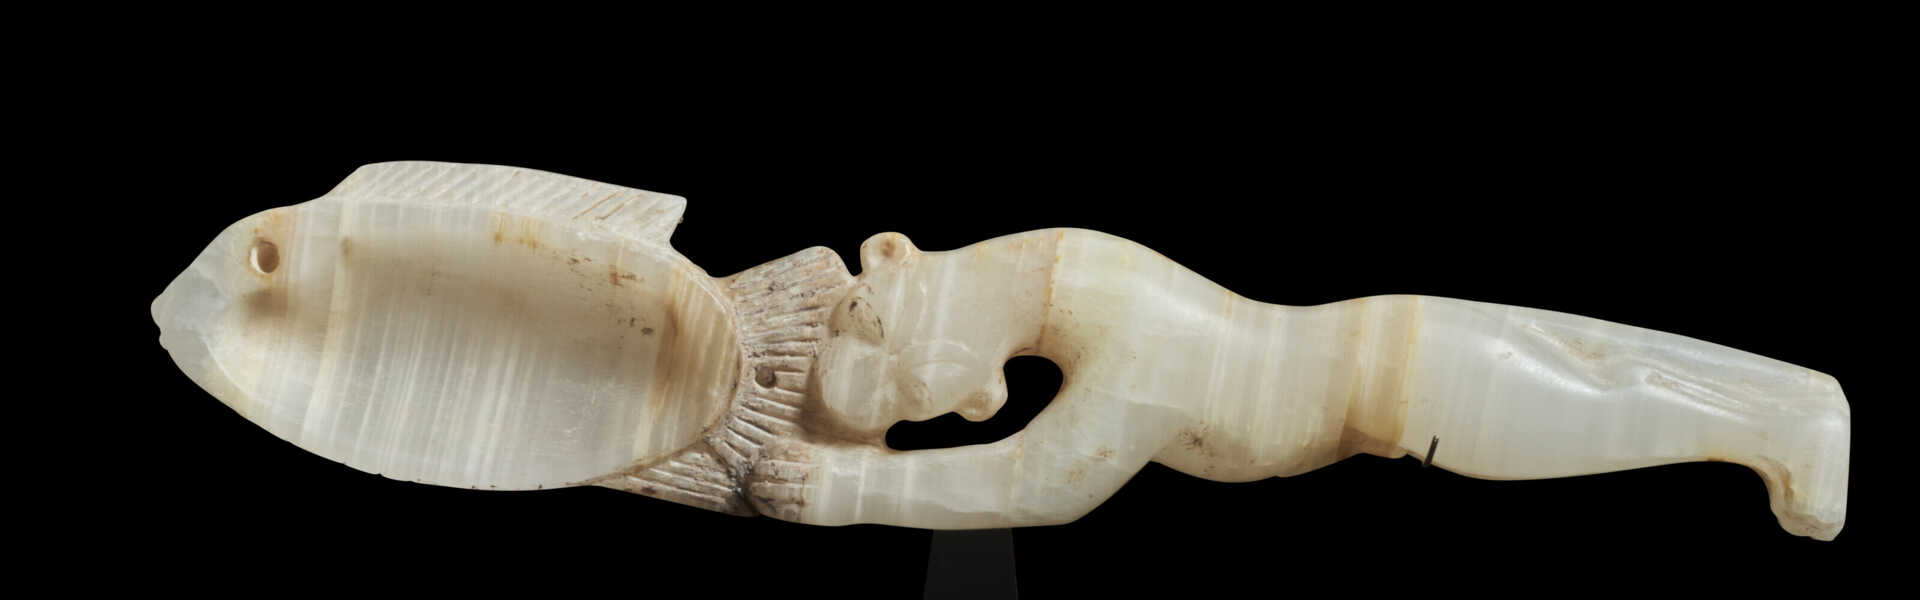 AN EGYPTIAN ALABASTER COSMETIC SPOON